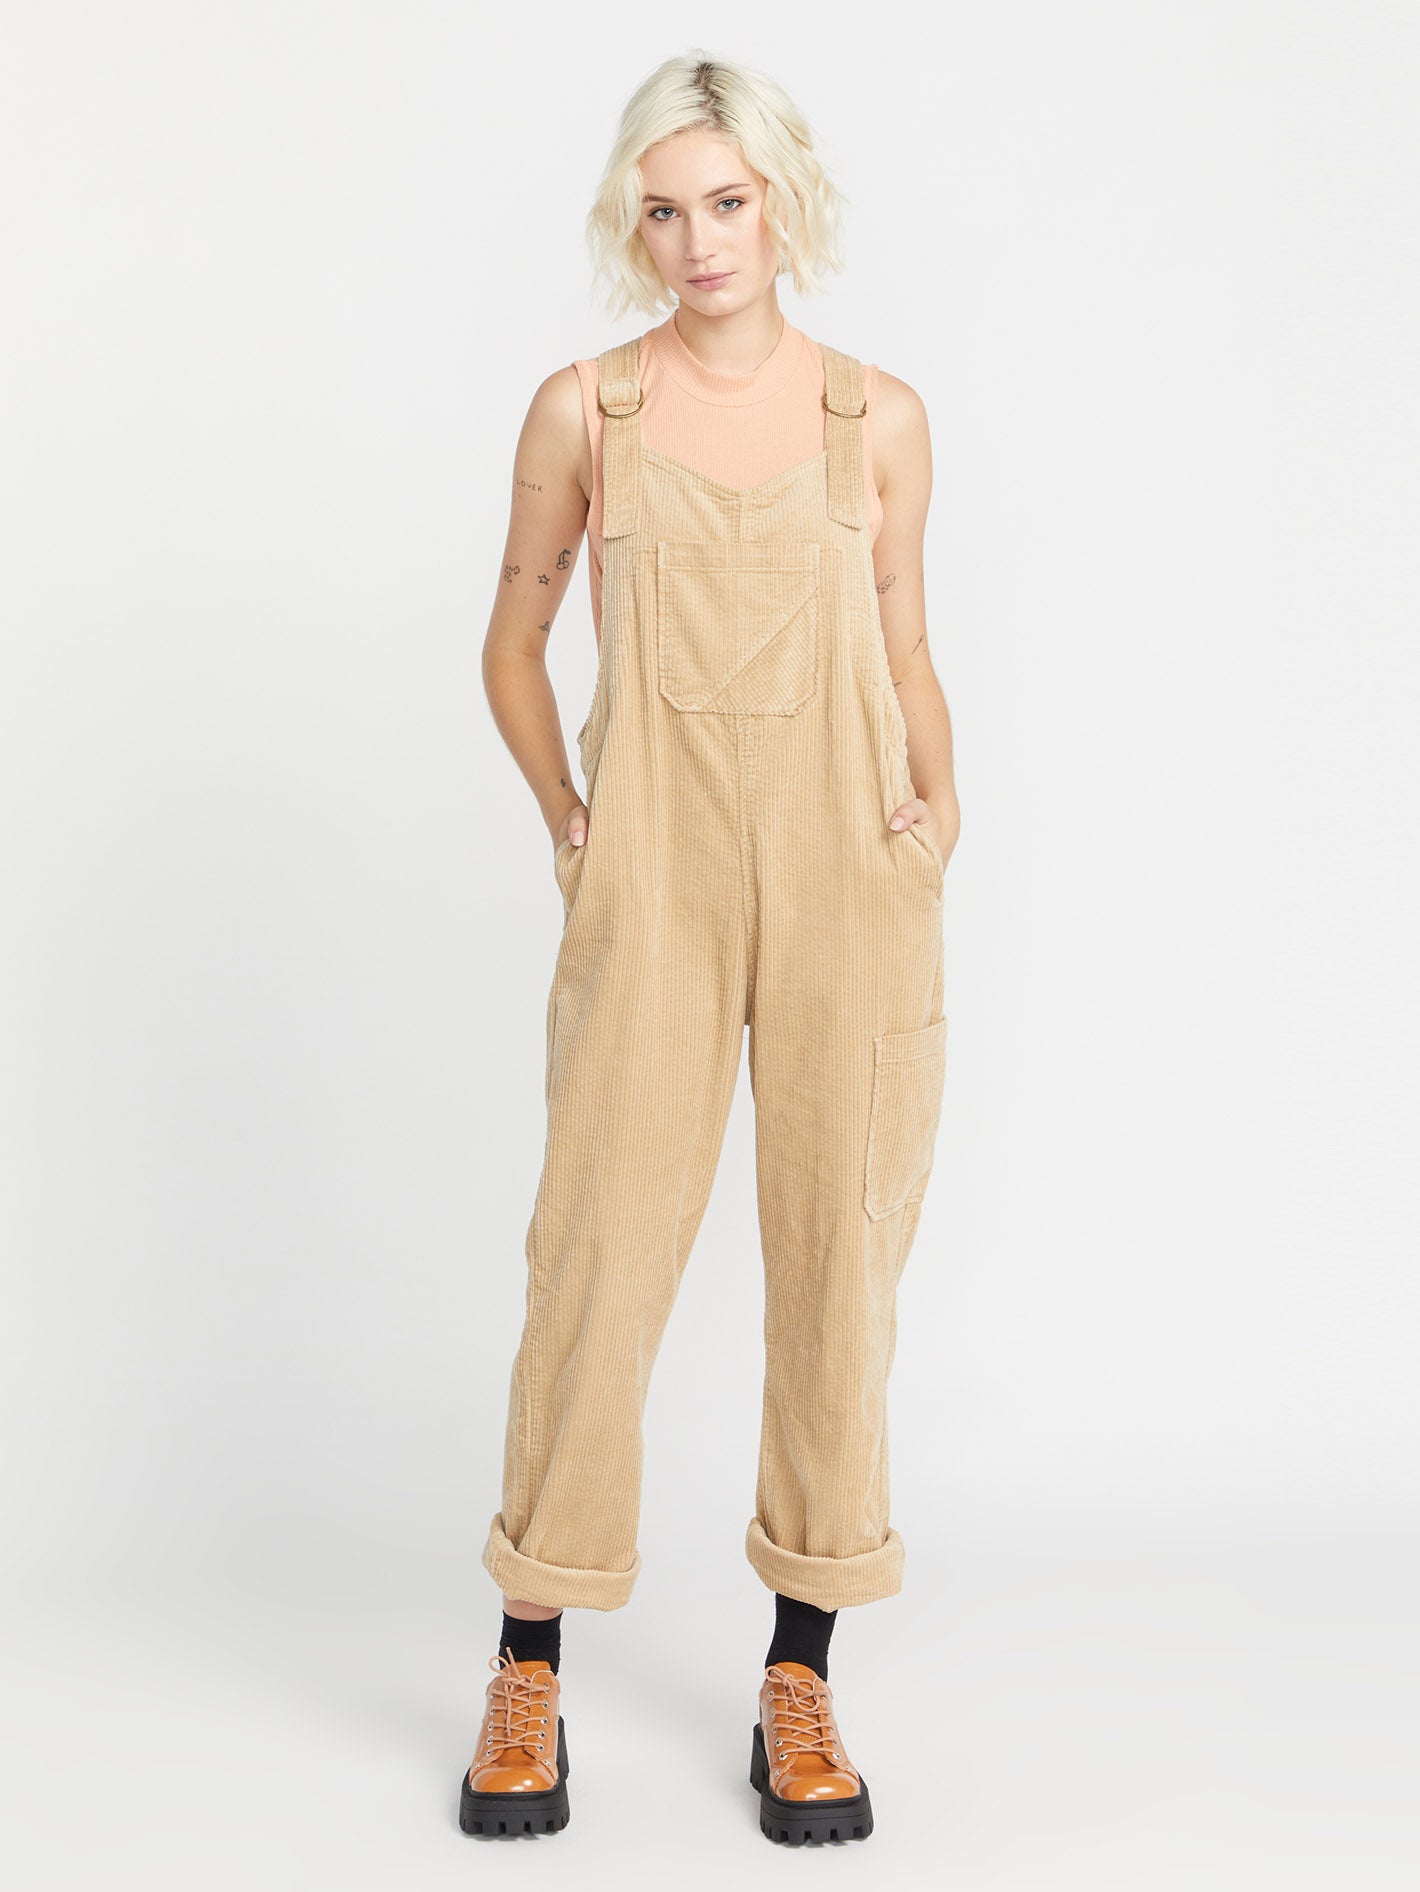 10 Best Overalls for Women, Stylist-Selected | Well+Good